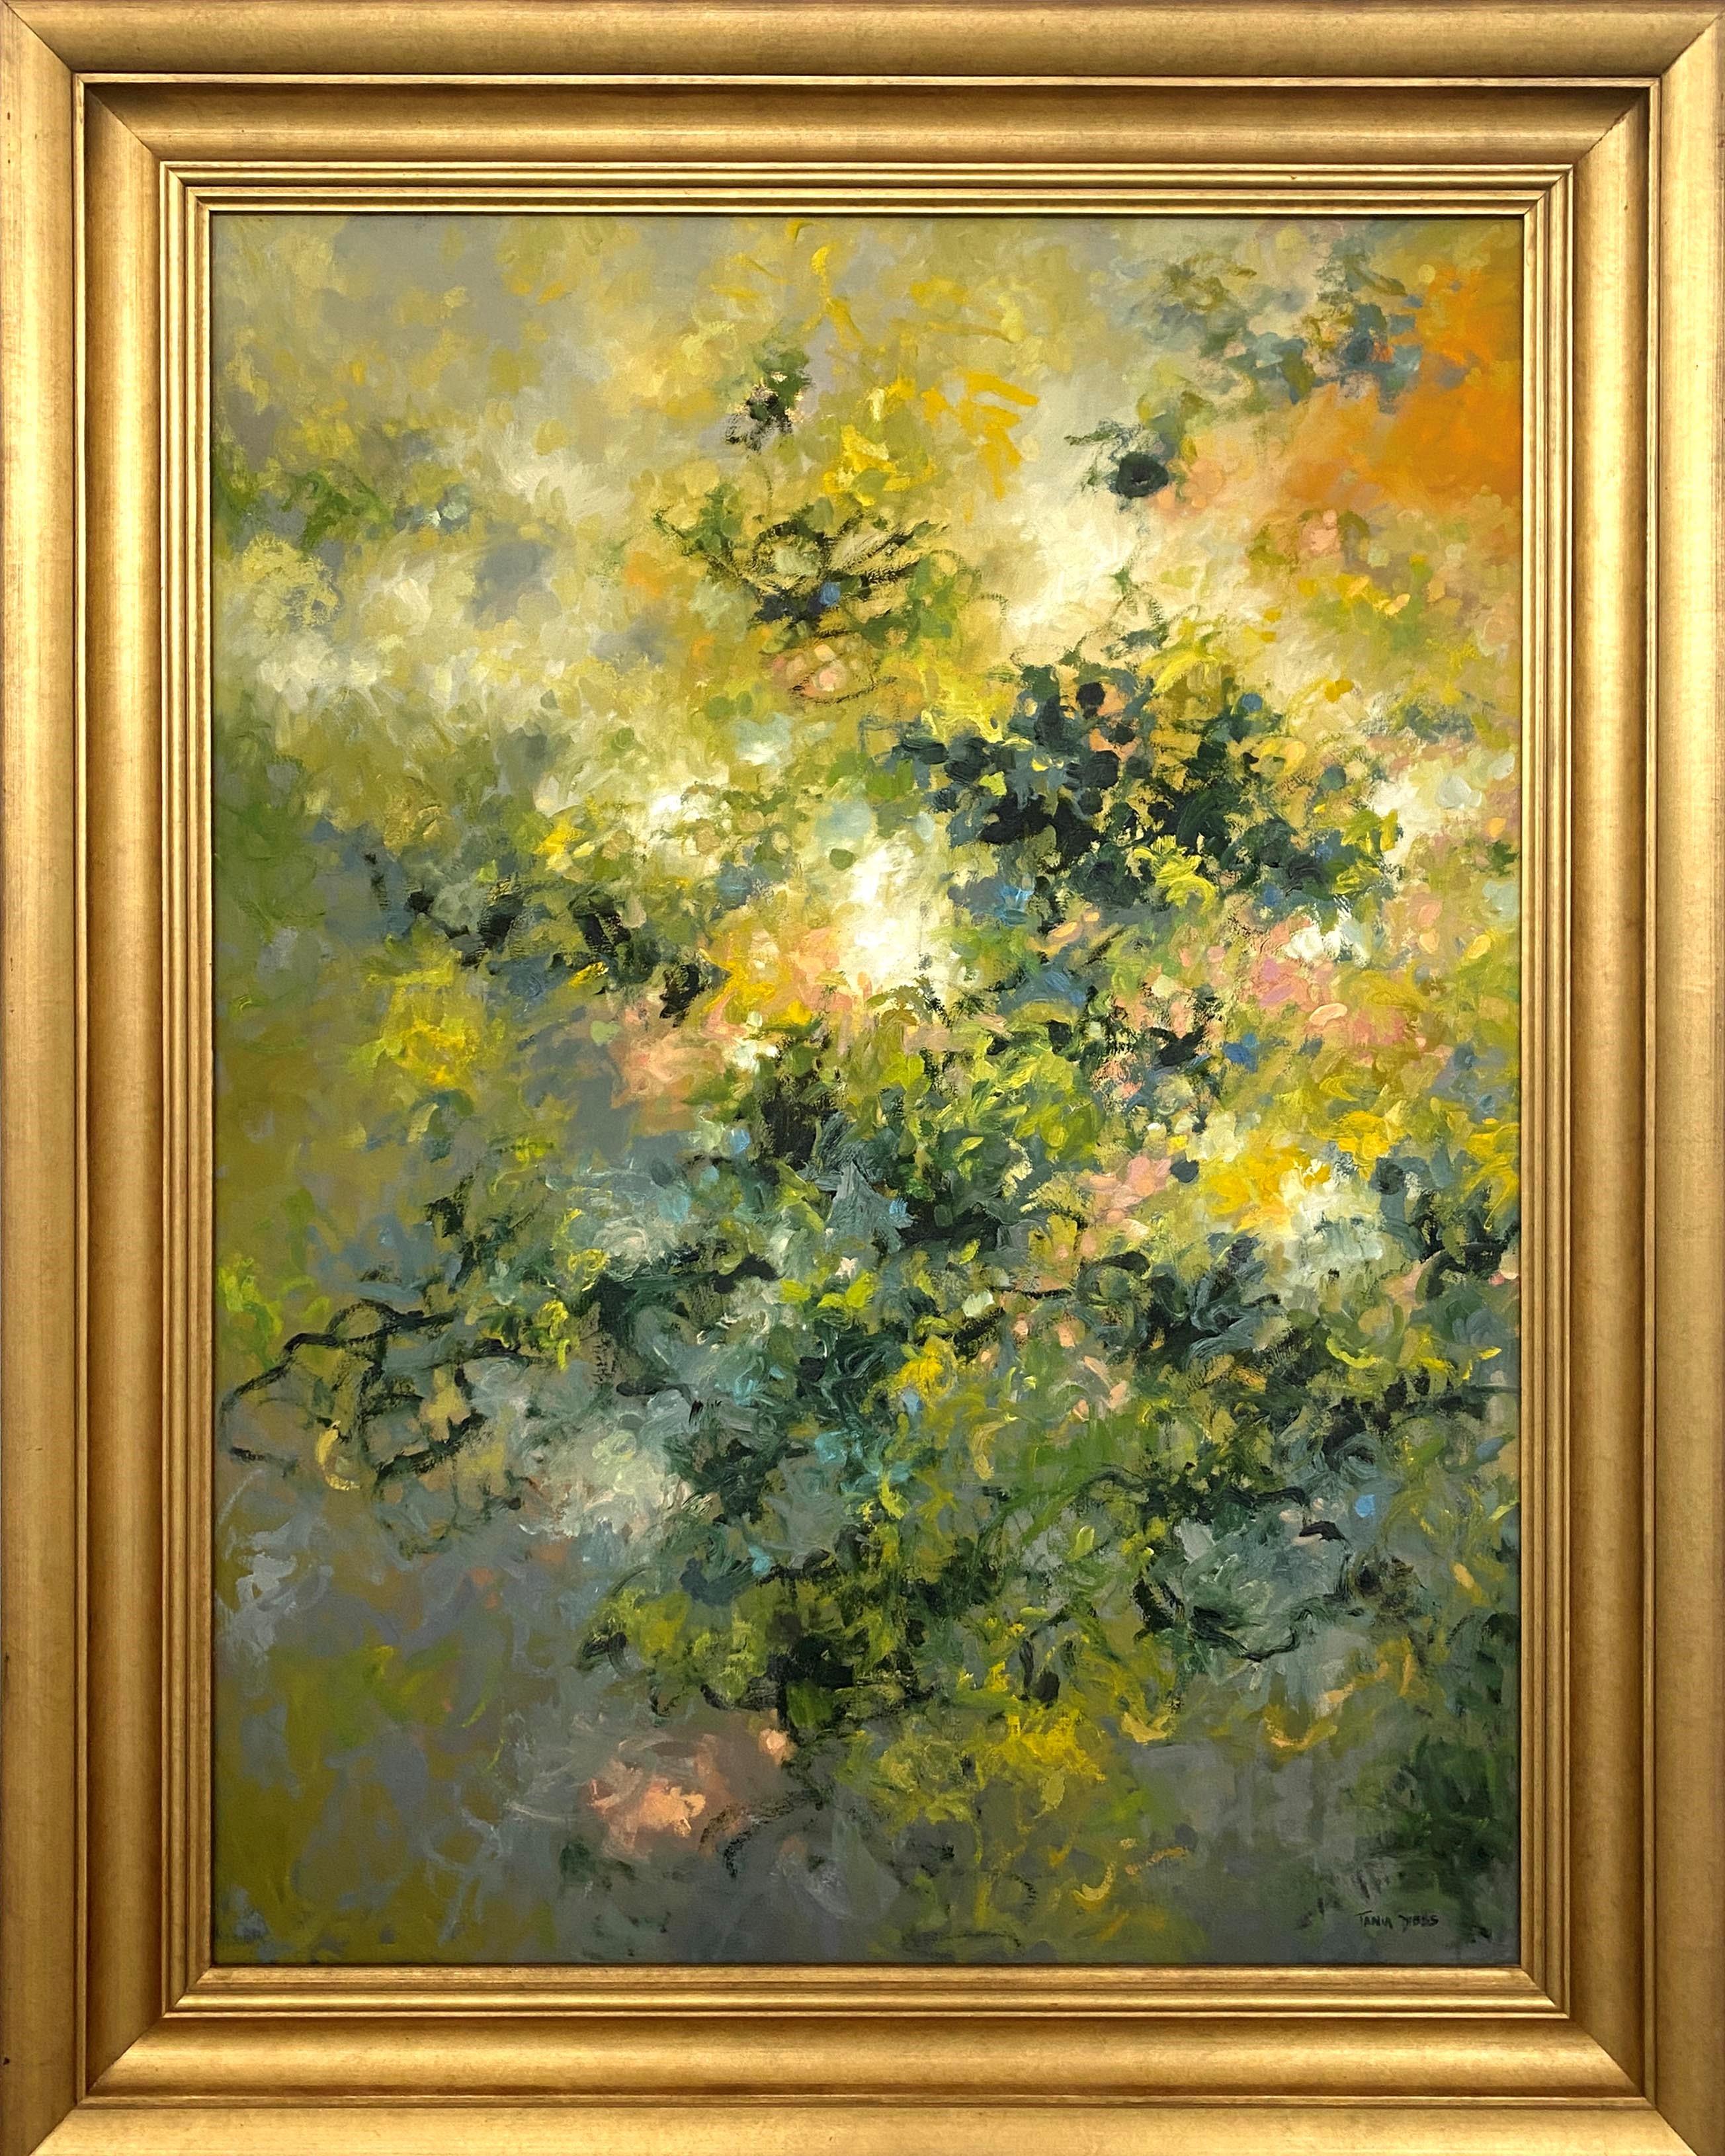 Tania Dibbs Landscape Painting - Fourzah, contemporary floral landscape oil painting in custom gold frame